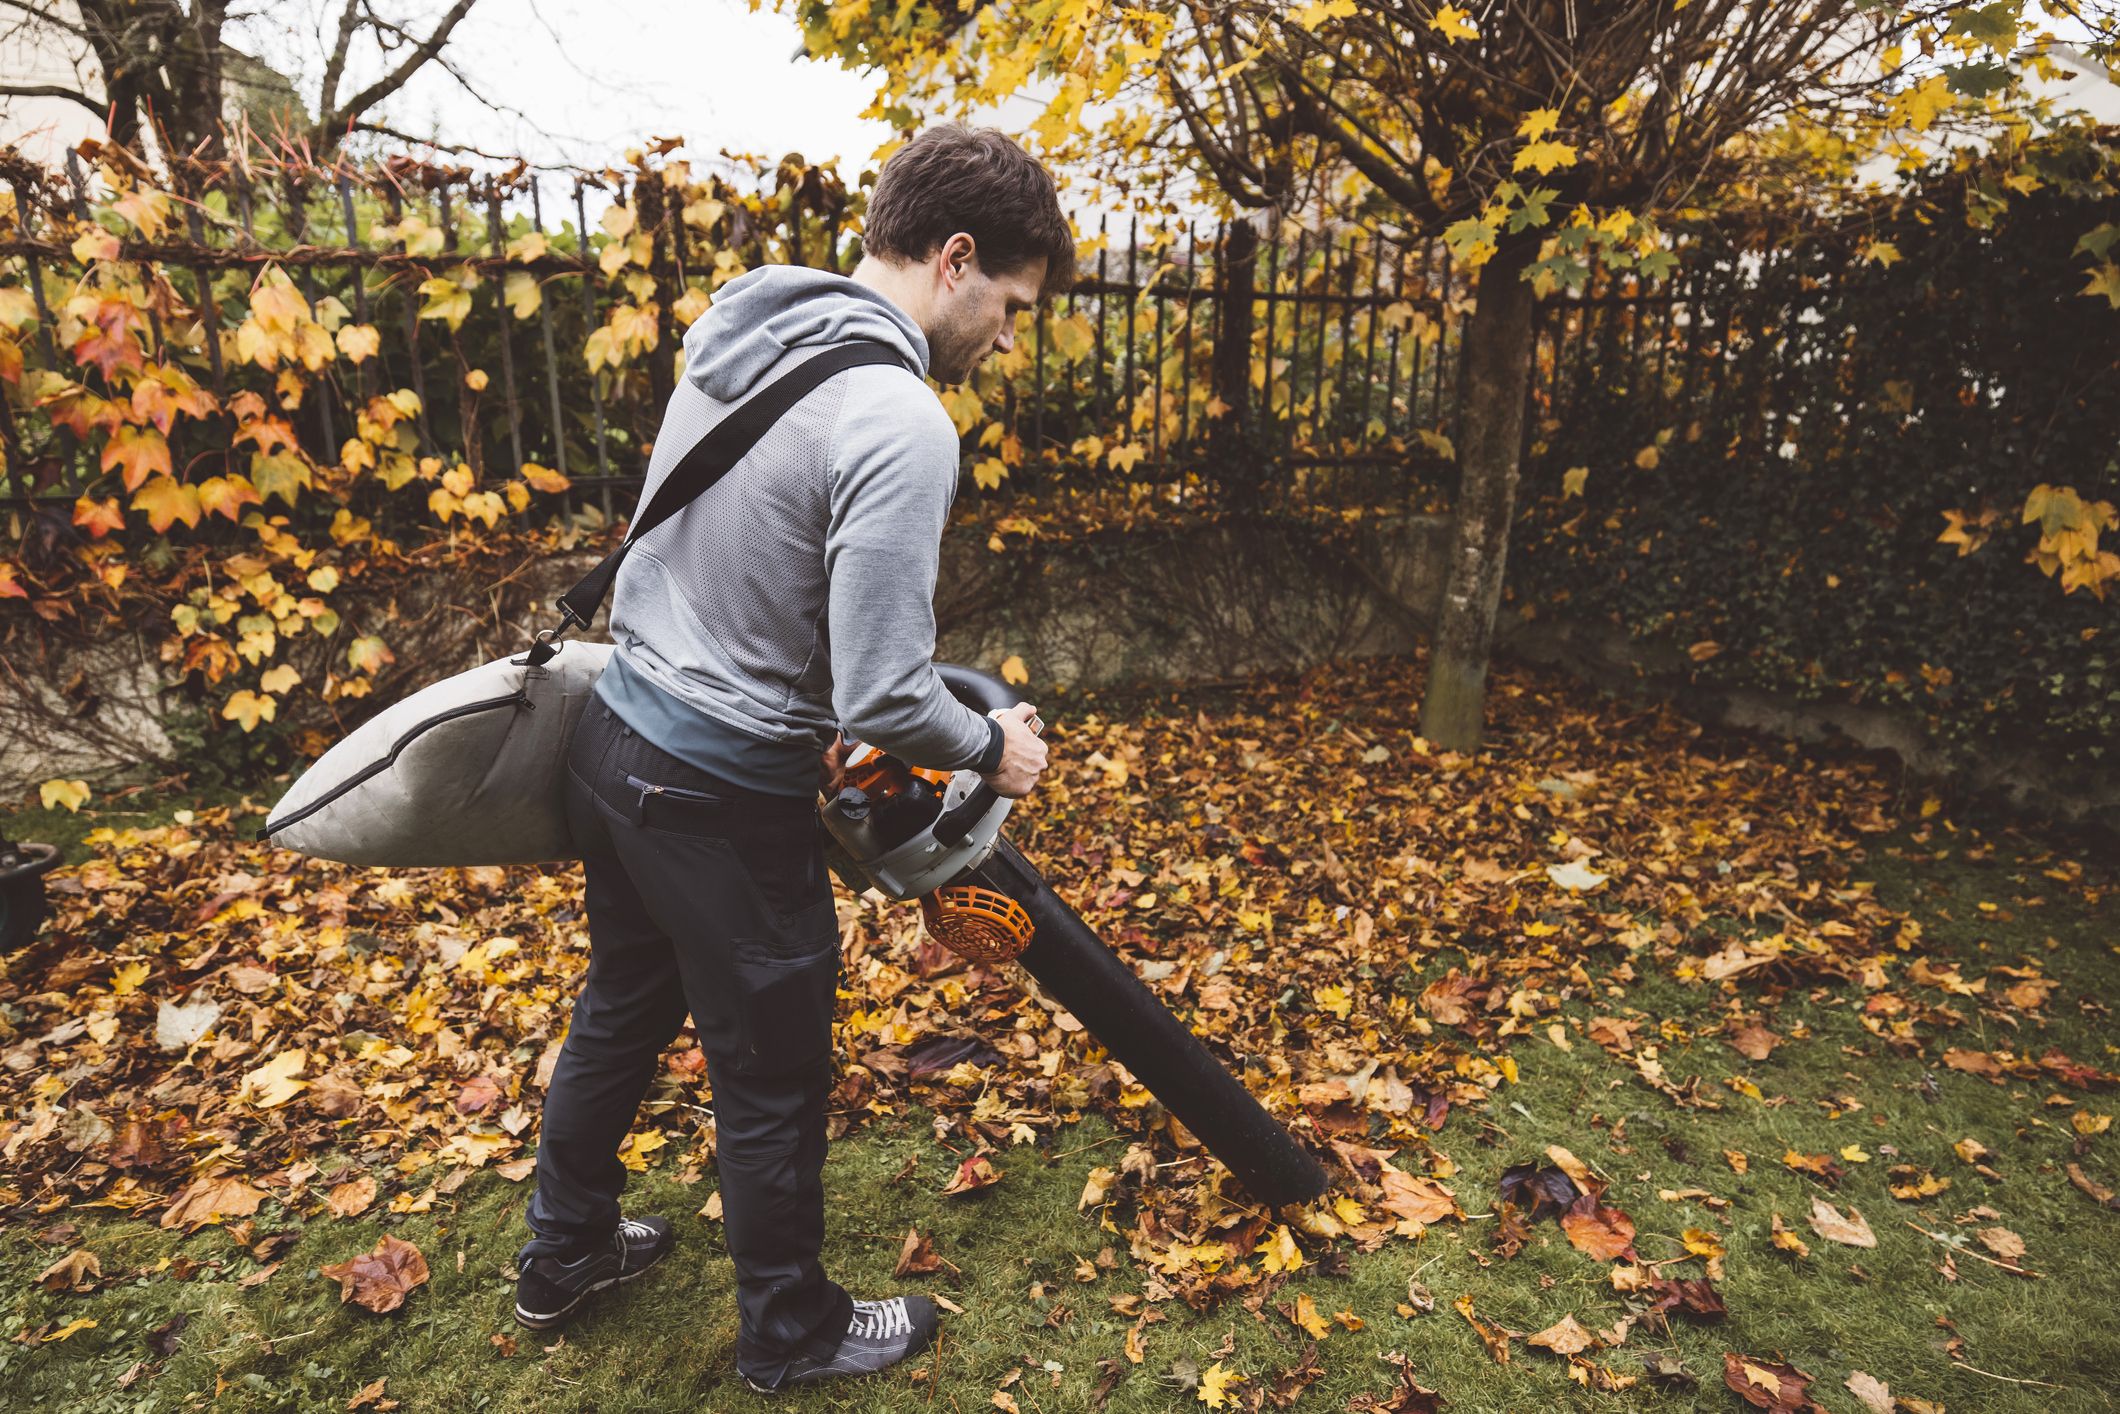 https://hips.hearstapps.com/hmg-prod/images/back-view-of-a-man-vacuuming-crispy-leaves-with-royalty-free-image-1693508926.jpg